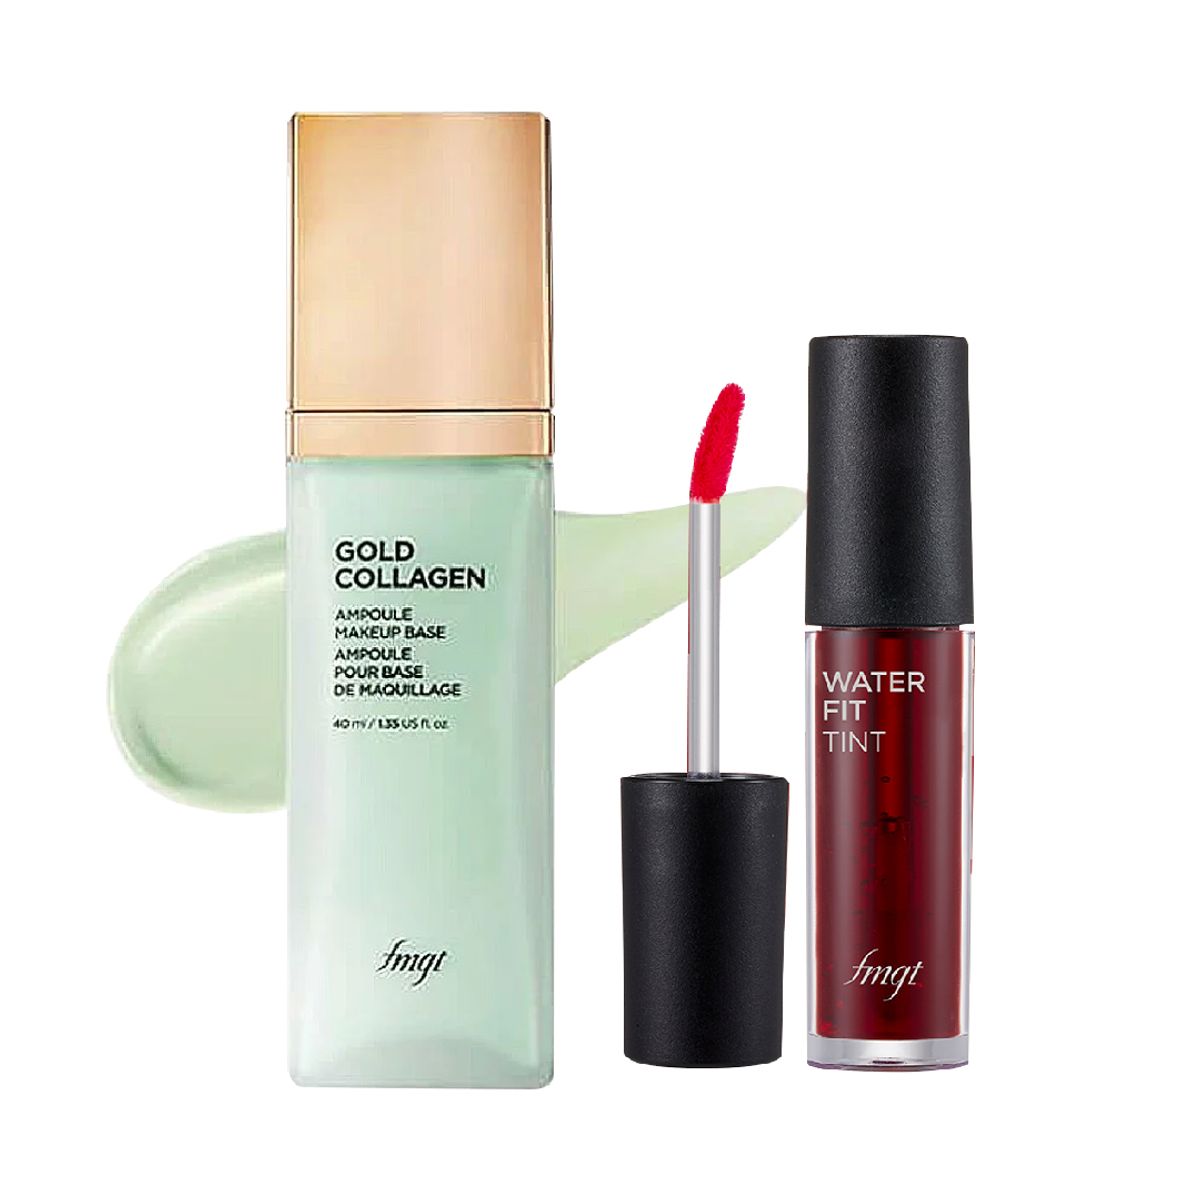 gift-combo-kem-lot-thefaceshop-gold-collagen-ampoule-02-green-son-tint-li-water-fit-lip-04-red-signal-1